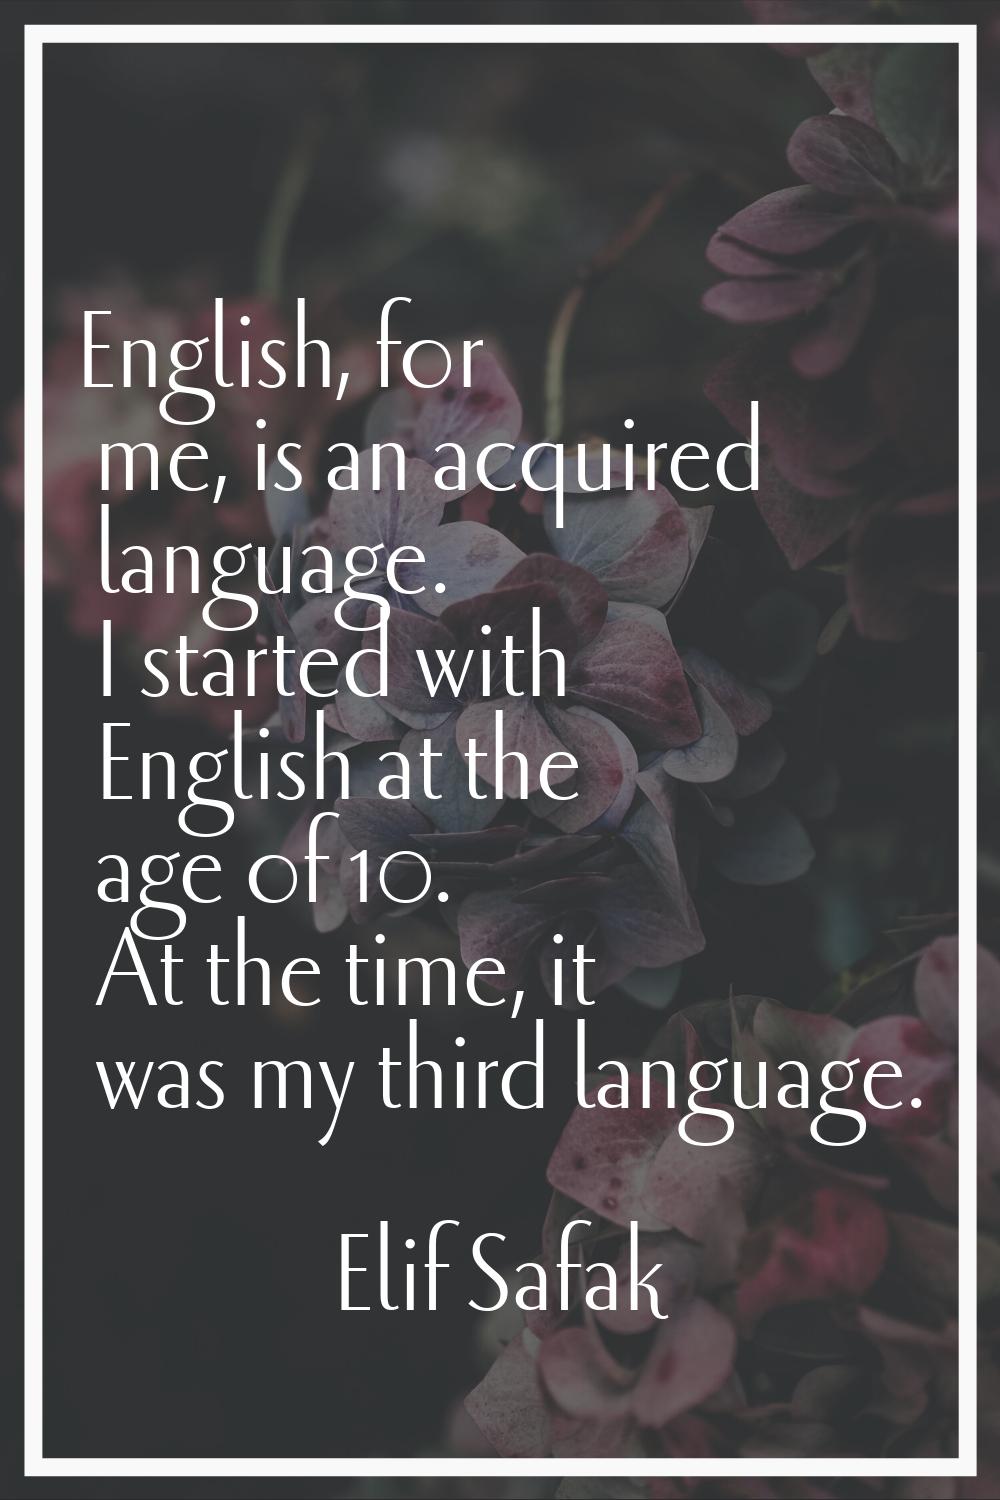 English, for me, is an acquired language. I started with English at the age of 10. At the time, it 